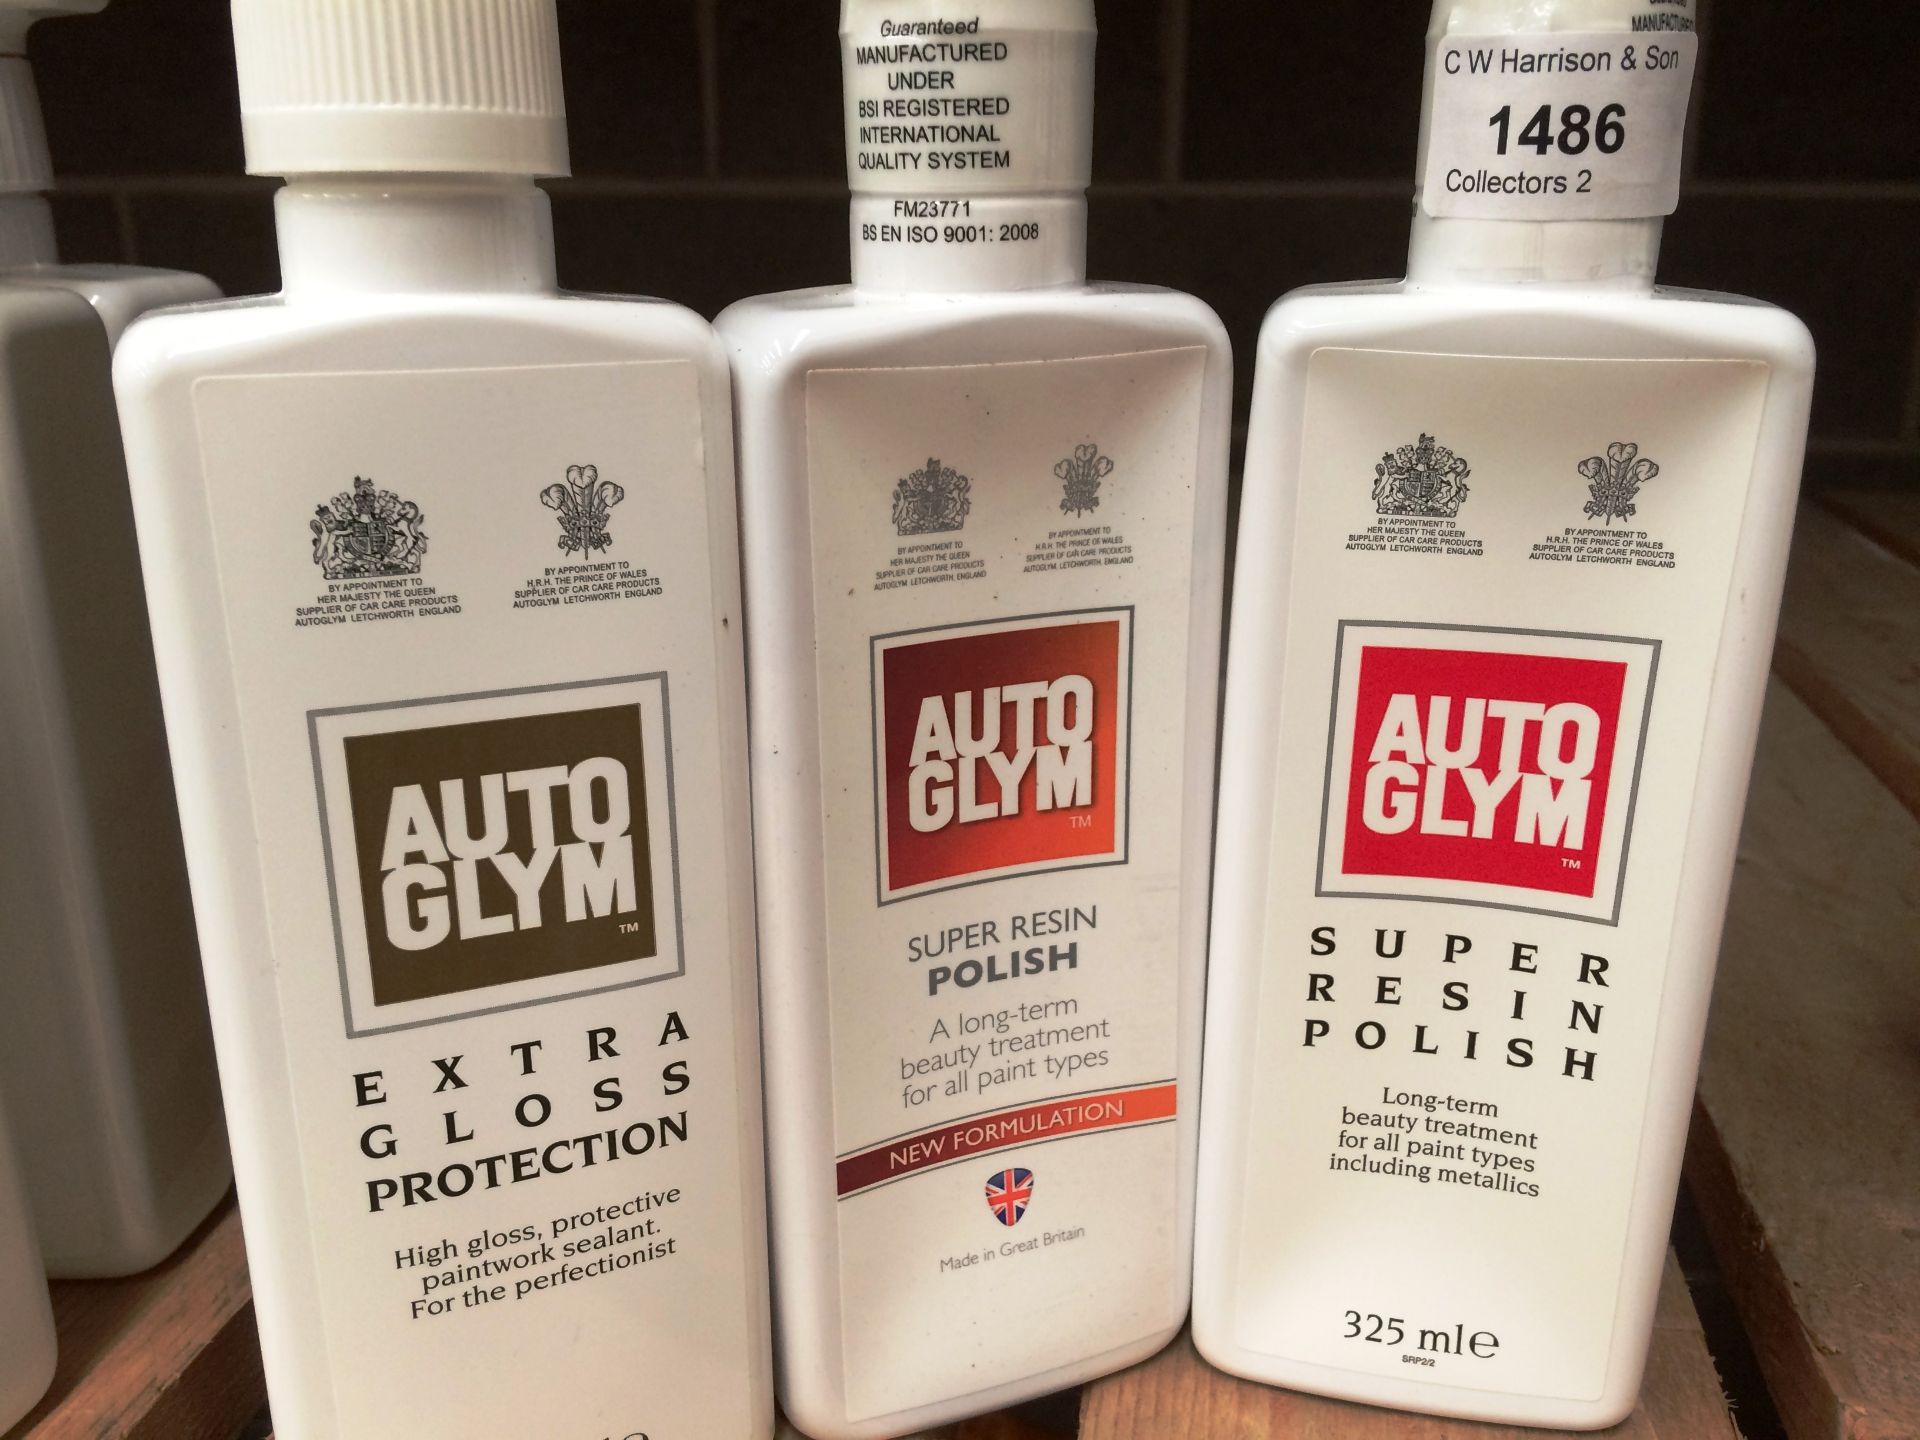 3 assorted Auto Glym products 2 x 325ml Super Resin Polish and 1 x 325ml extra gloss protection